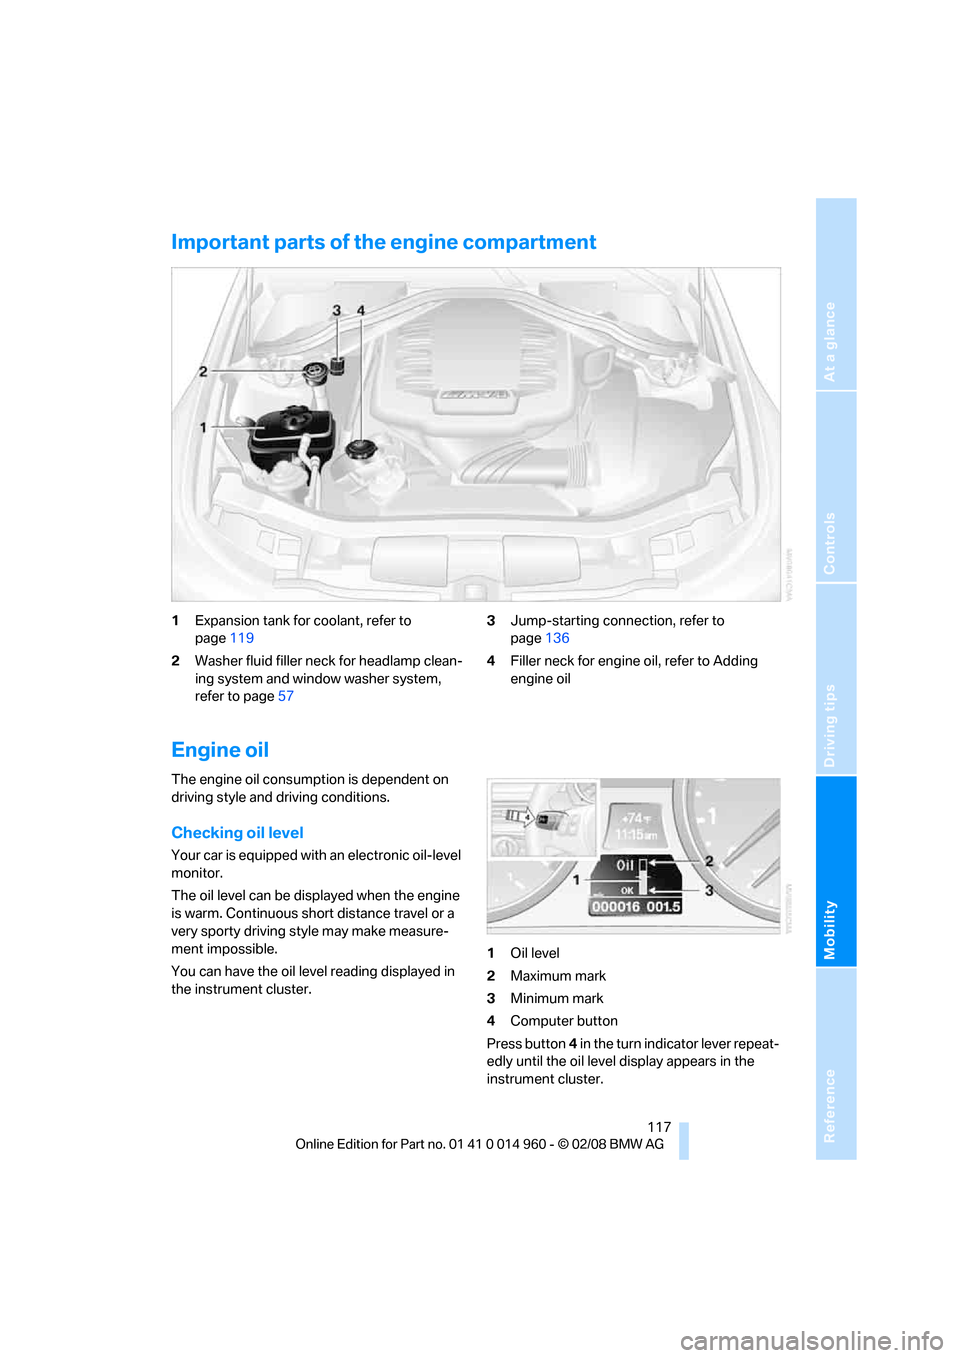 BMW M3 CONVERTIBLE 2008 E93 Owners Manual Reference
At a glance
Controls
Driving tips
Mobility
 117
Important parts of the engine compartment
1Expansion tank for coolant, refer to 
page119
2Washer fluid filler neck for headlamp clean-
ing sys